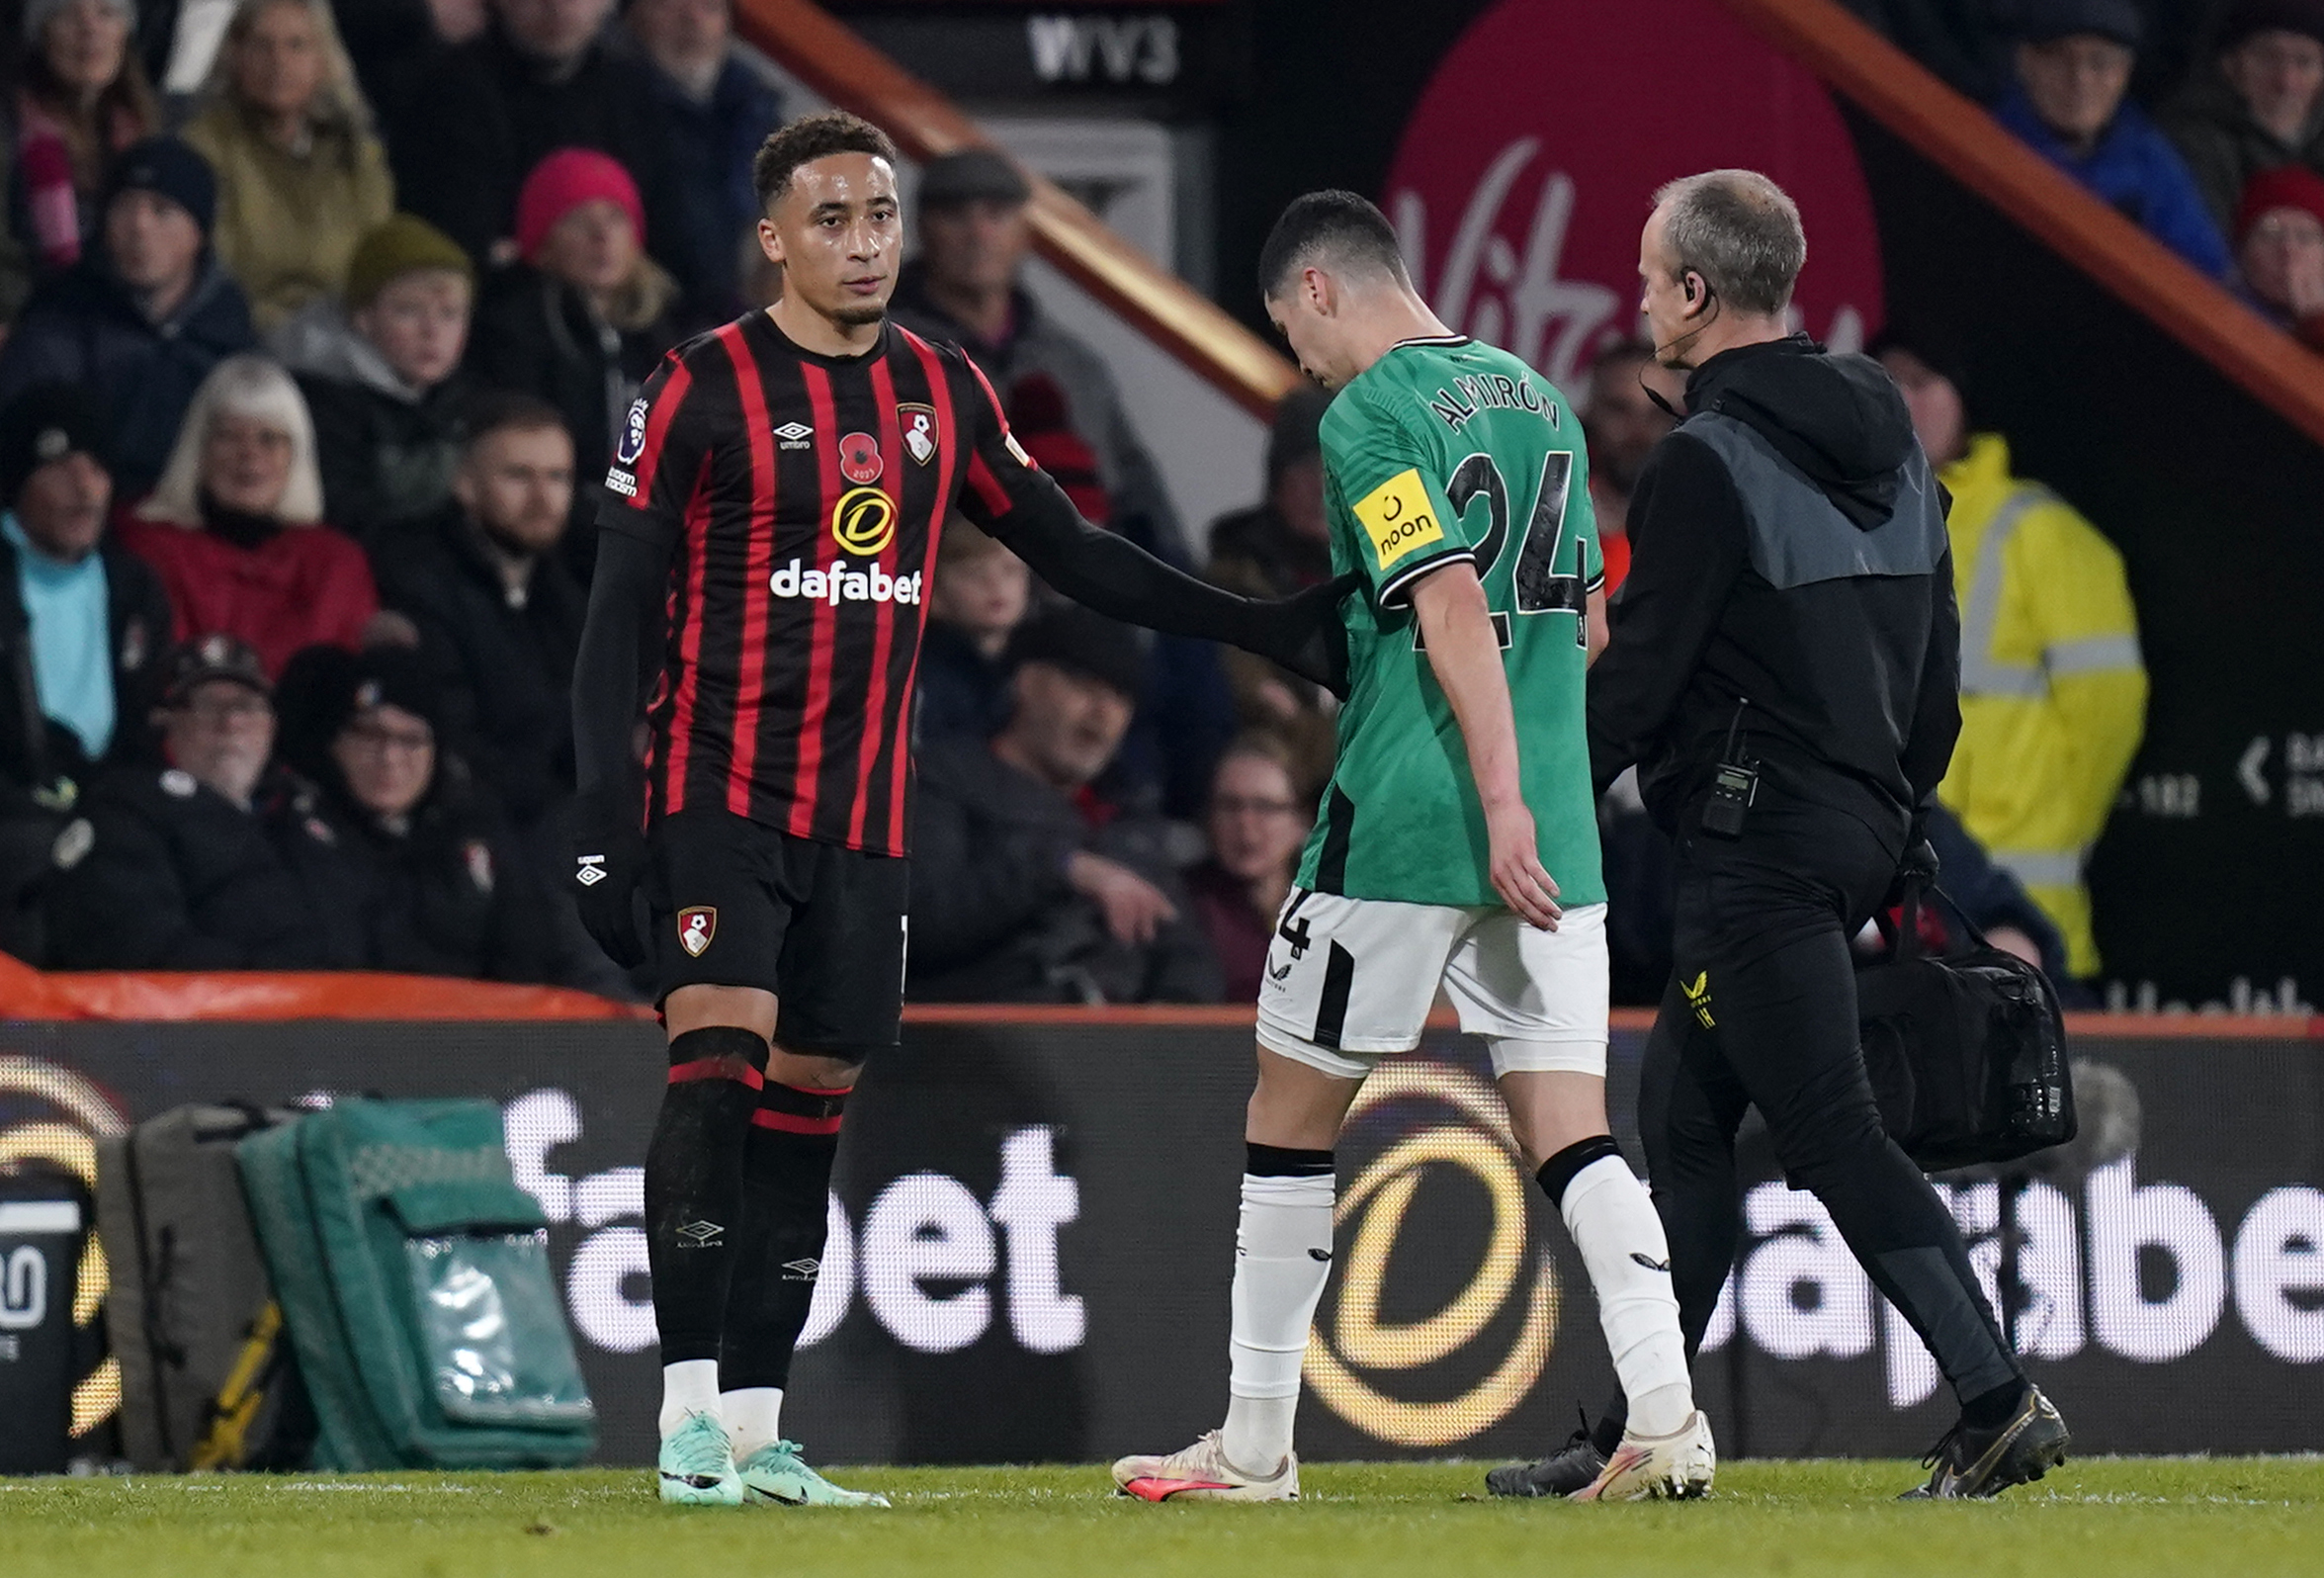 Newcastle’s Miguel Almiron is consoled by Bournemouth’s Marcus Tavernier as he leaves the pitch injured